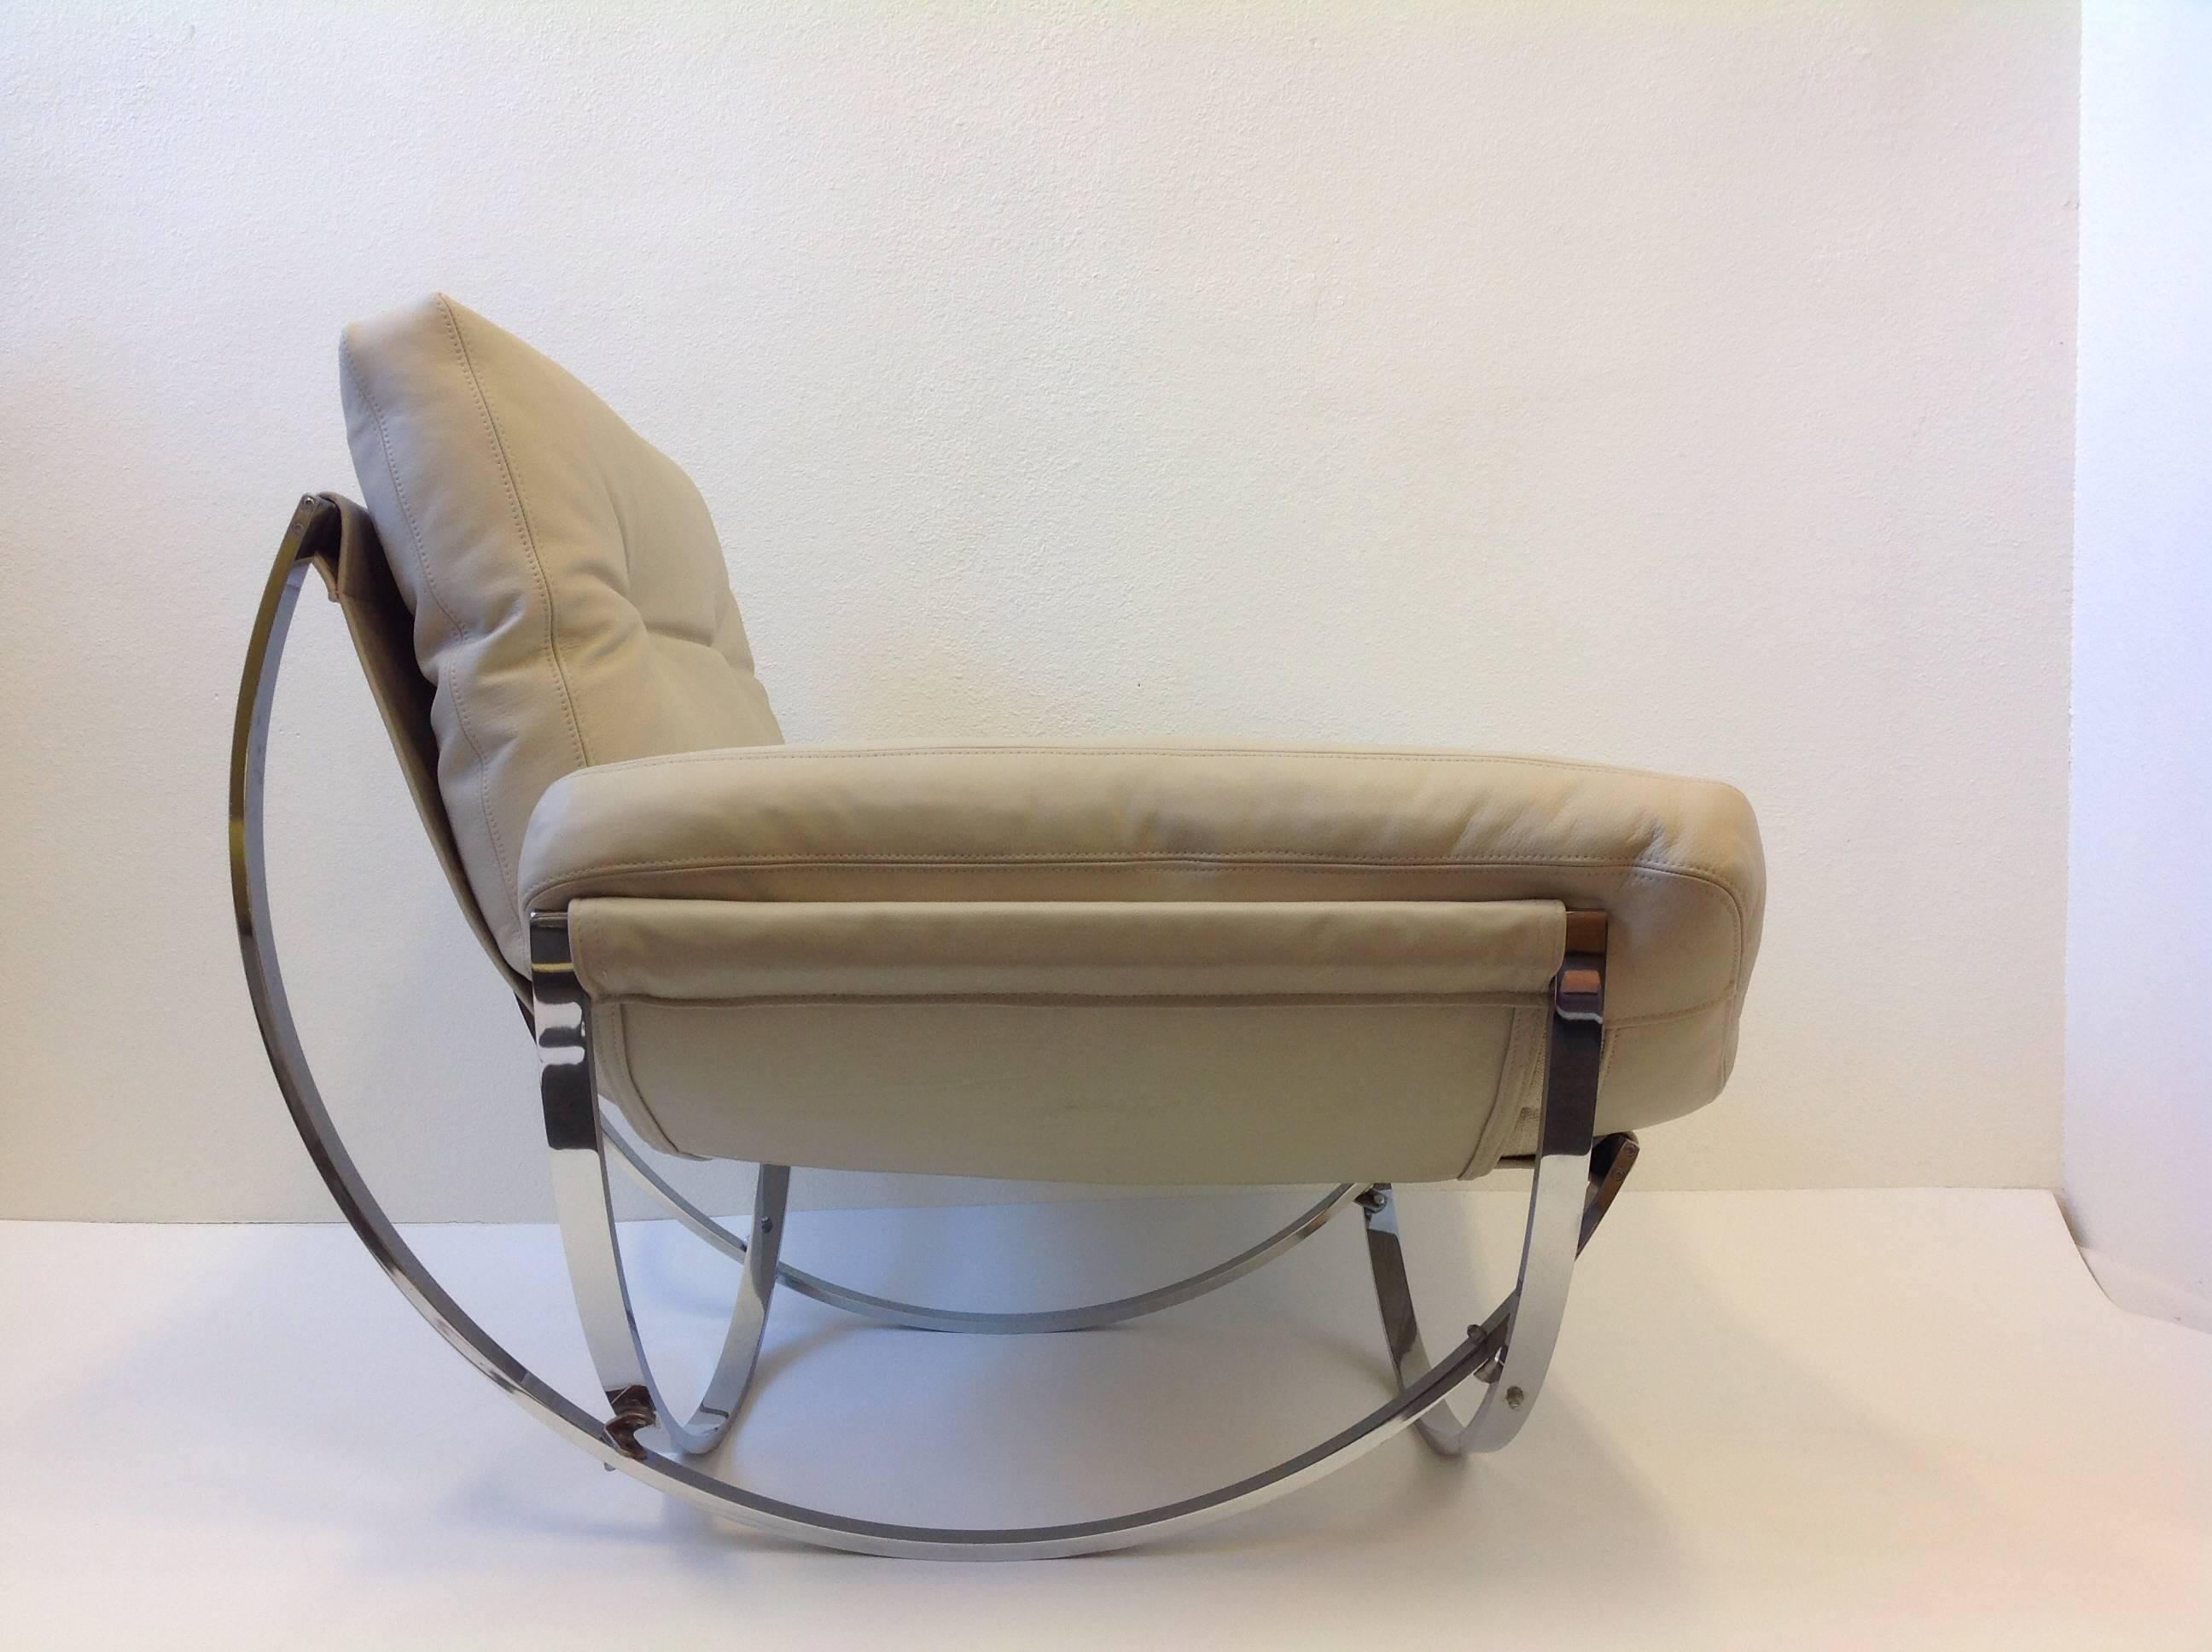 A amazing 1970s Italian lounge chair and ottoman by Stendig. The chair is constructed of solid polish stainless steel and reupholstered in a soft off white leather.  By Leonart Bender for Charlton Co.
Dimensions:
Chair 35